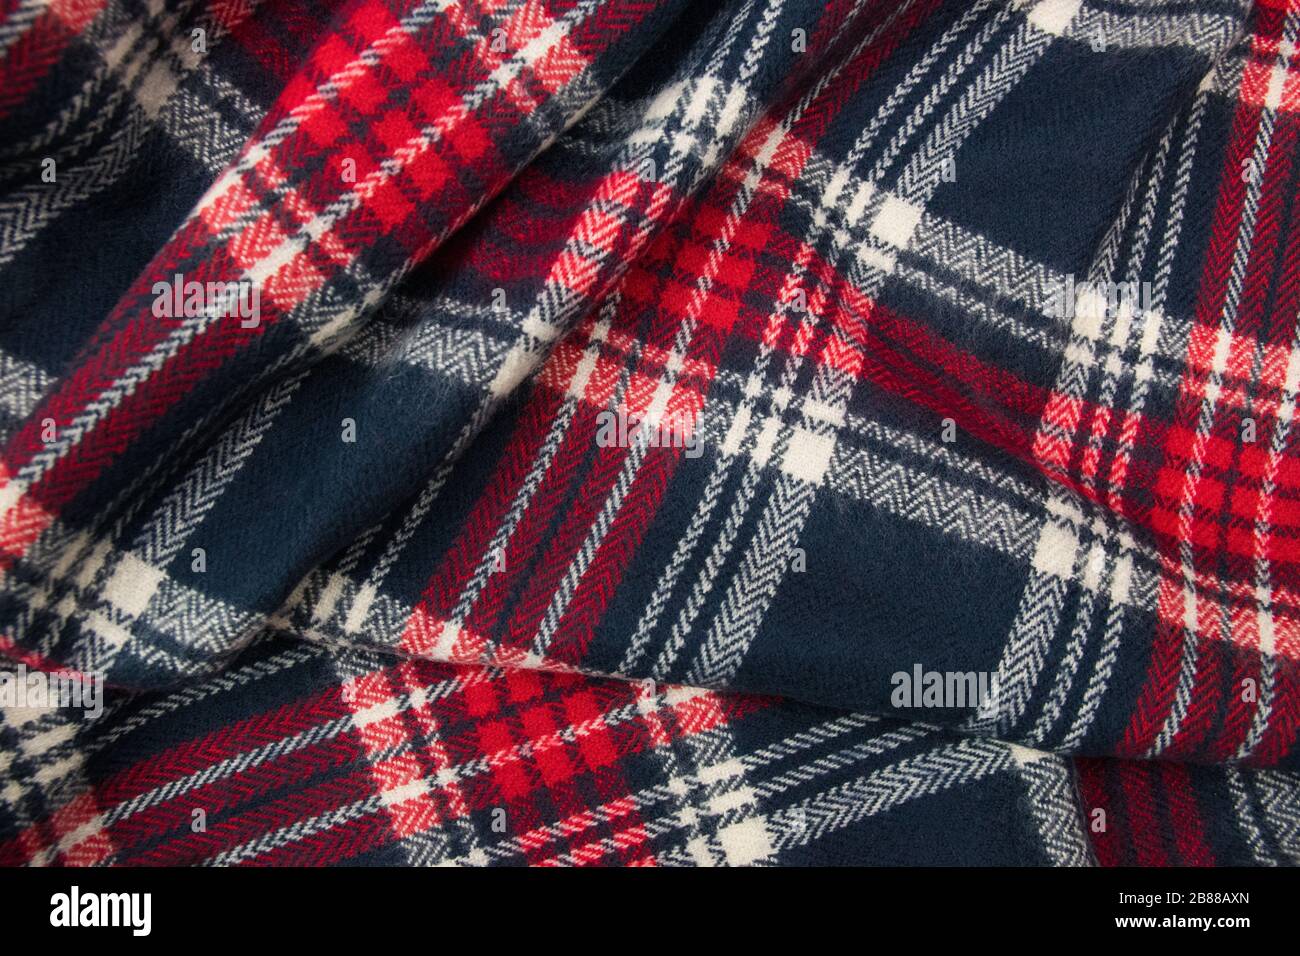 Winter cashmere scarf. Blue, white, red cage texture fabric. Textile warm dark knitted cloth background. Stock Photo